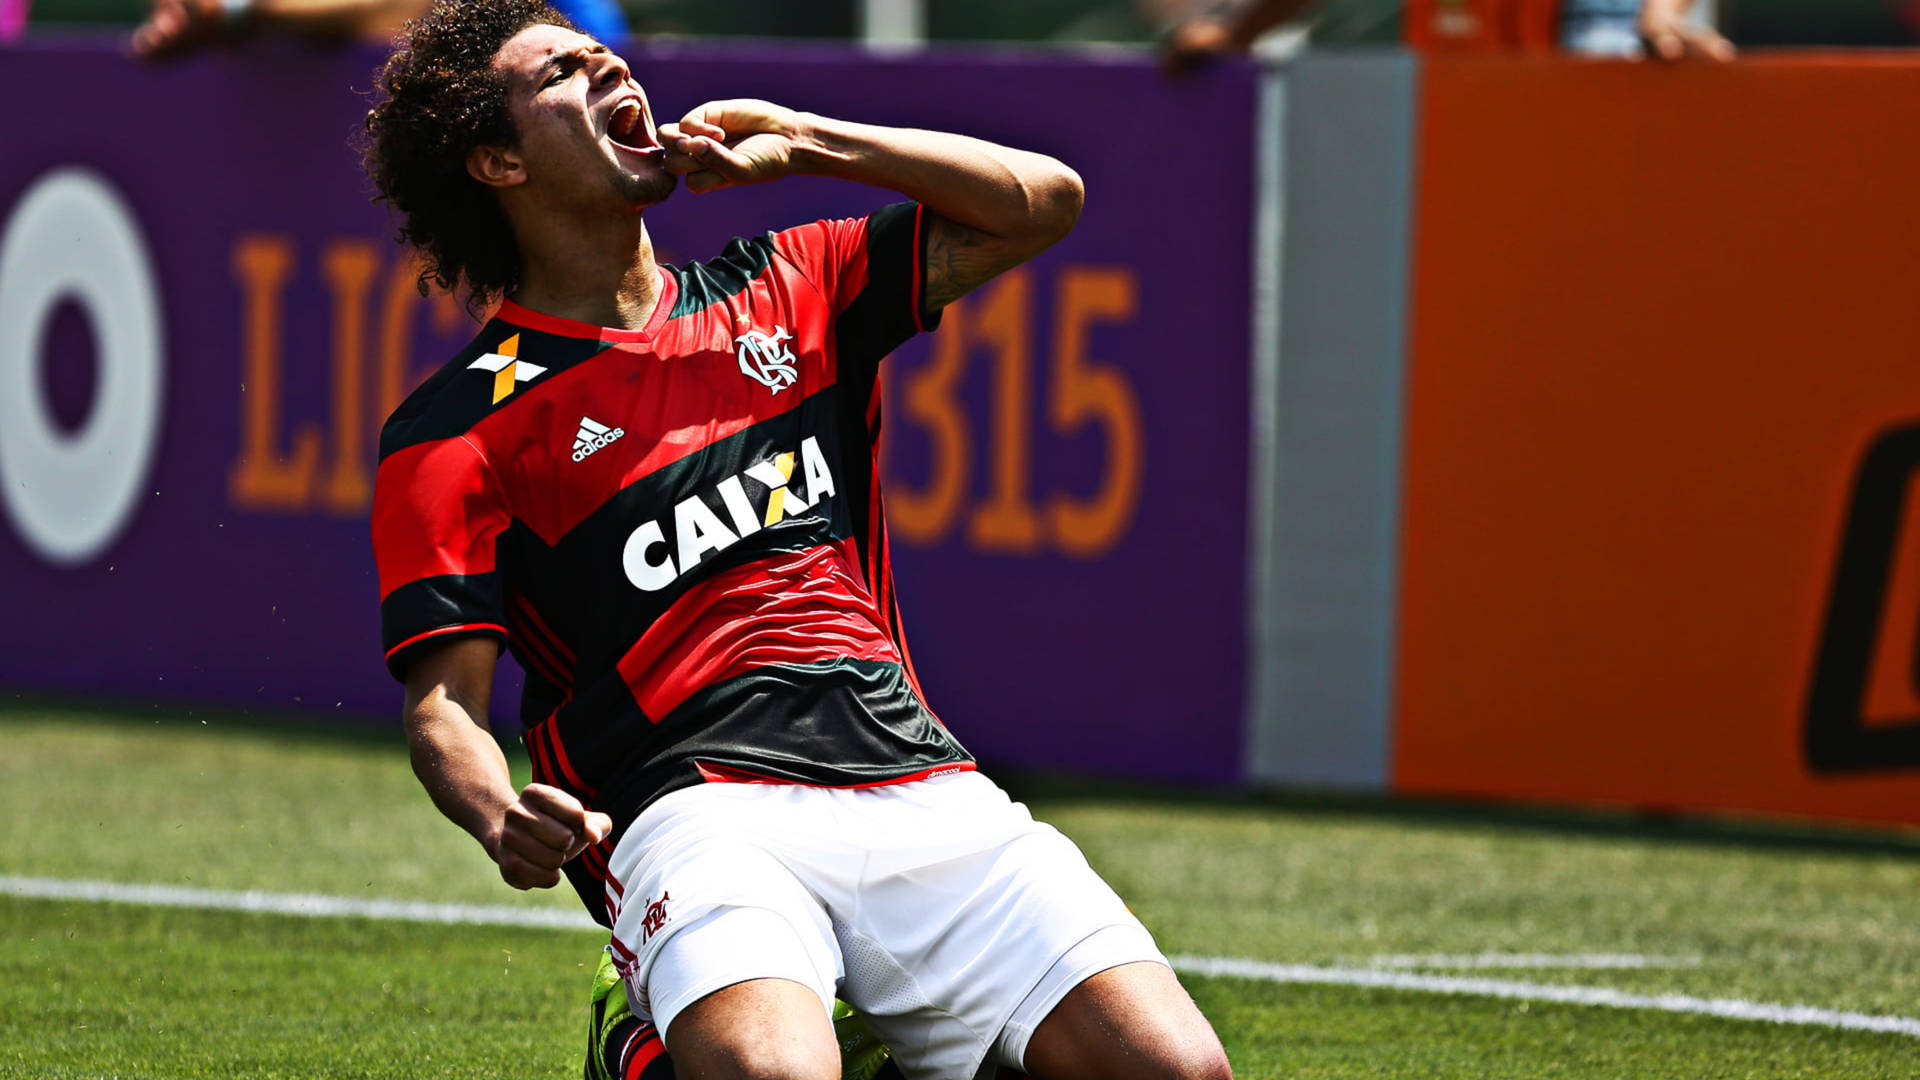 Flamengo Fc Star Player - Willian Arao In Action Background